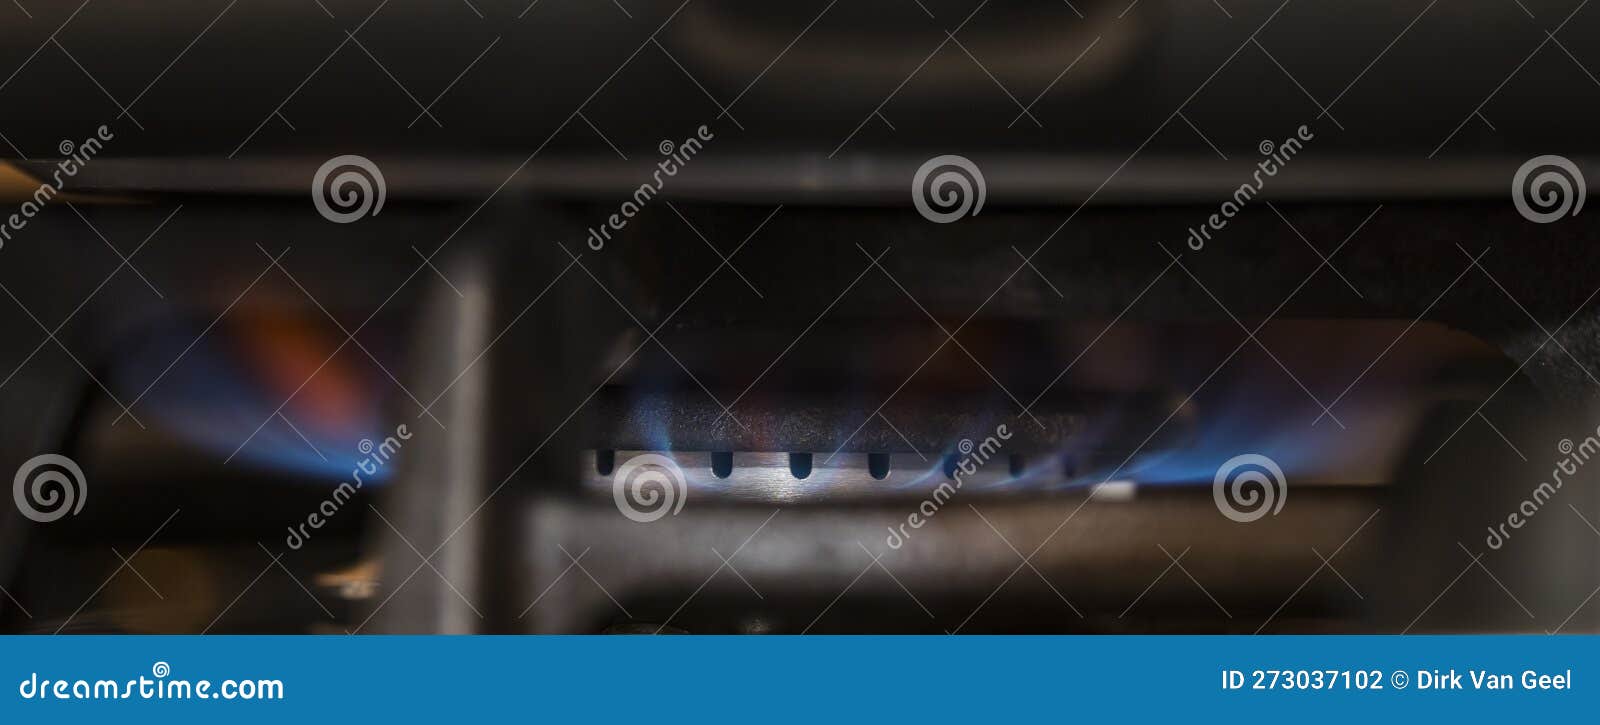 detailed vieuw of gas burning with blue flame on a cooking stove. energy. expensive. sustainability.